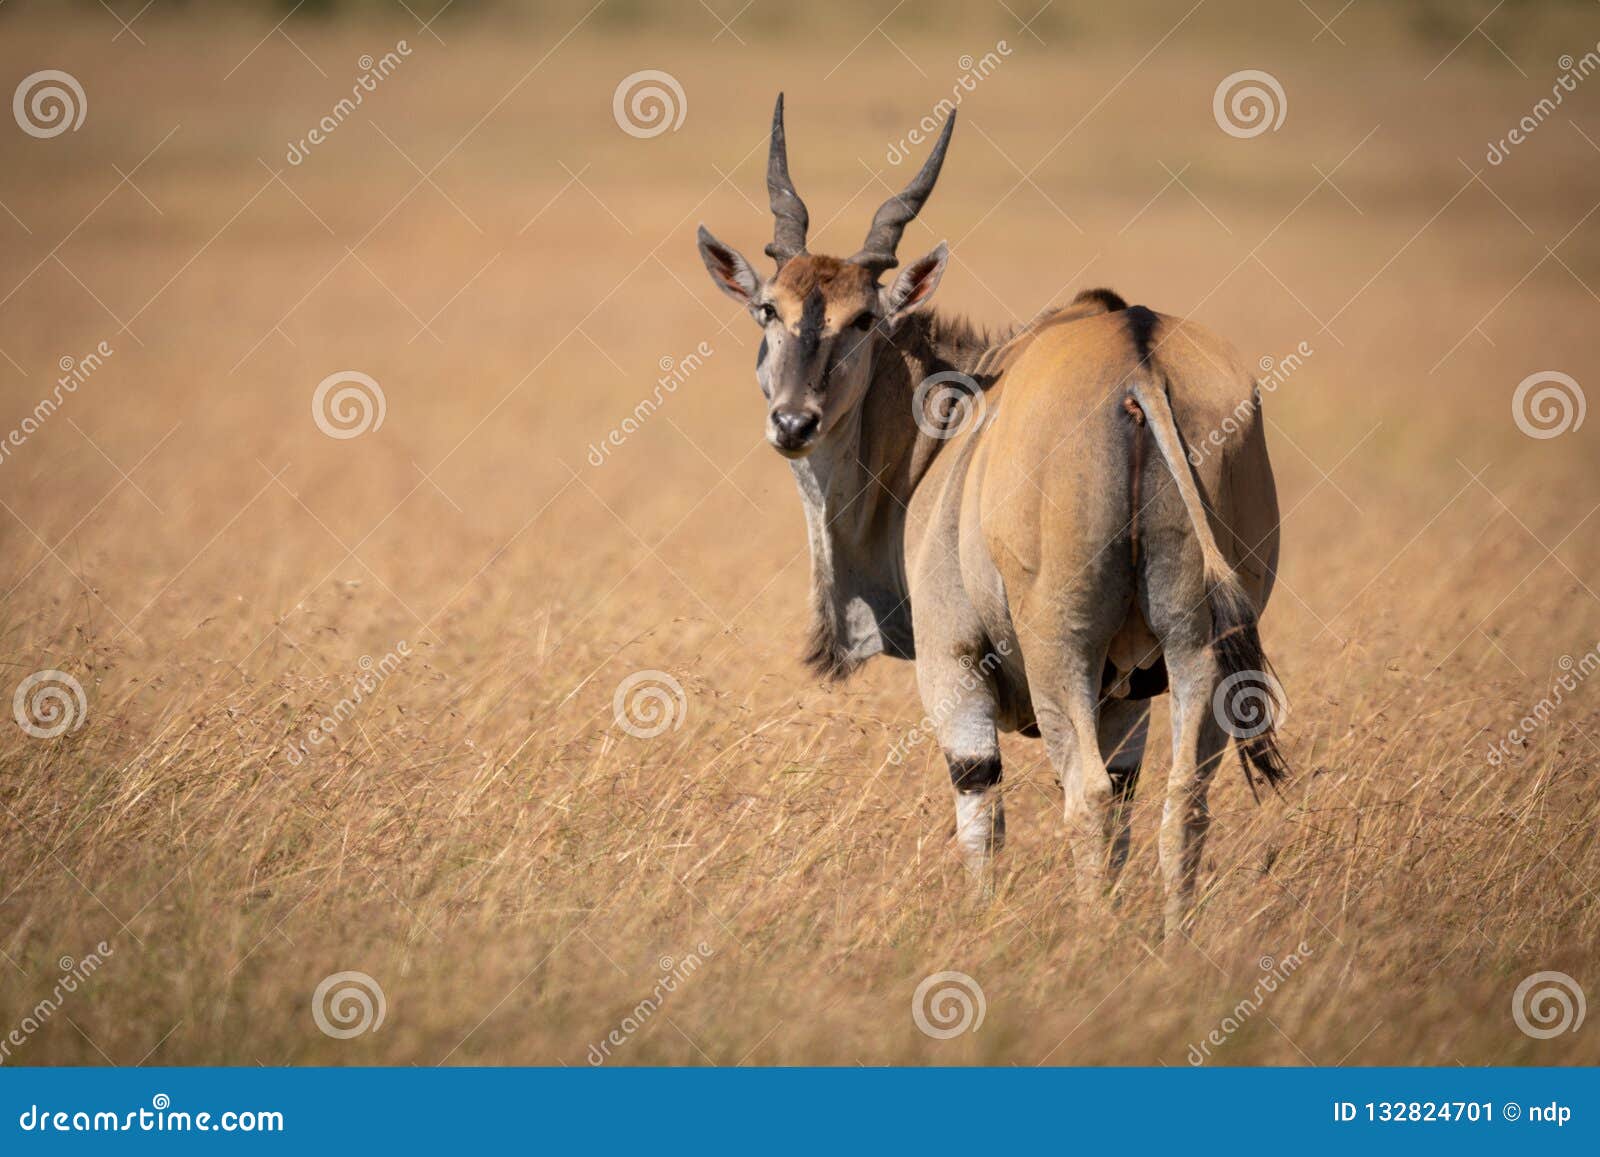 eland standing in long grass looks back